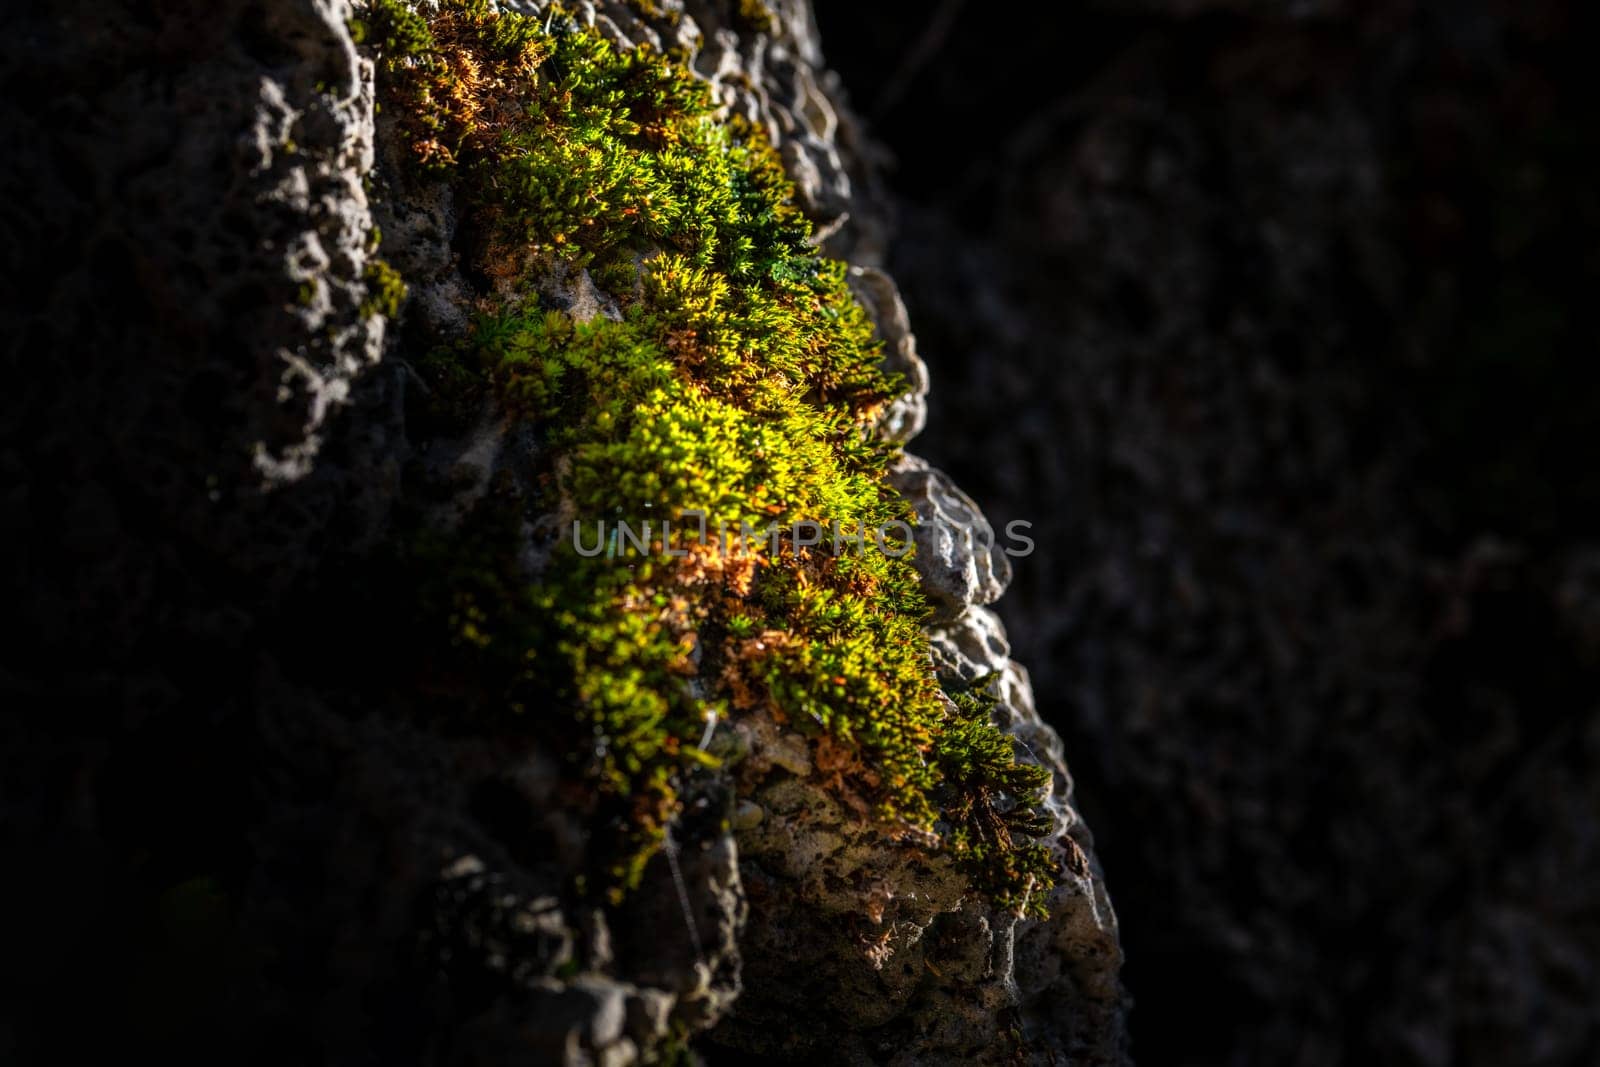 Moss on stone in damp forest. close-up and selective focus by Sonat